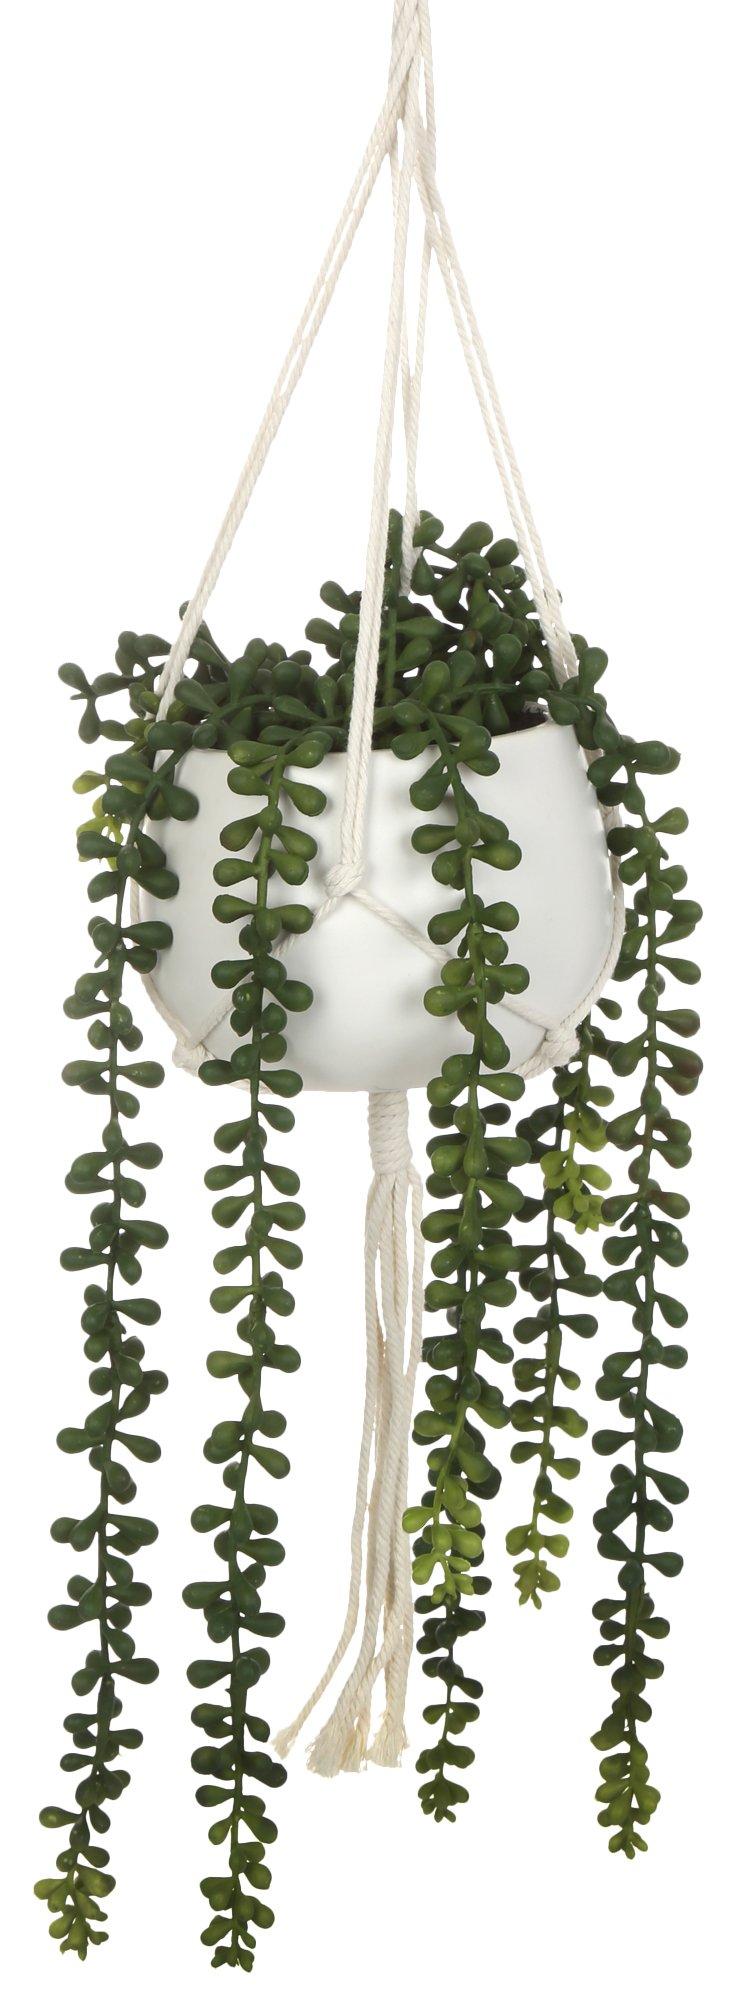 20 in. Hanging Plant Decor